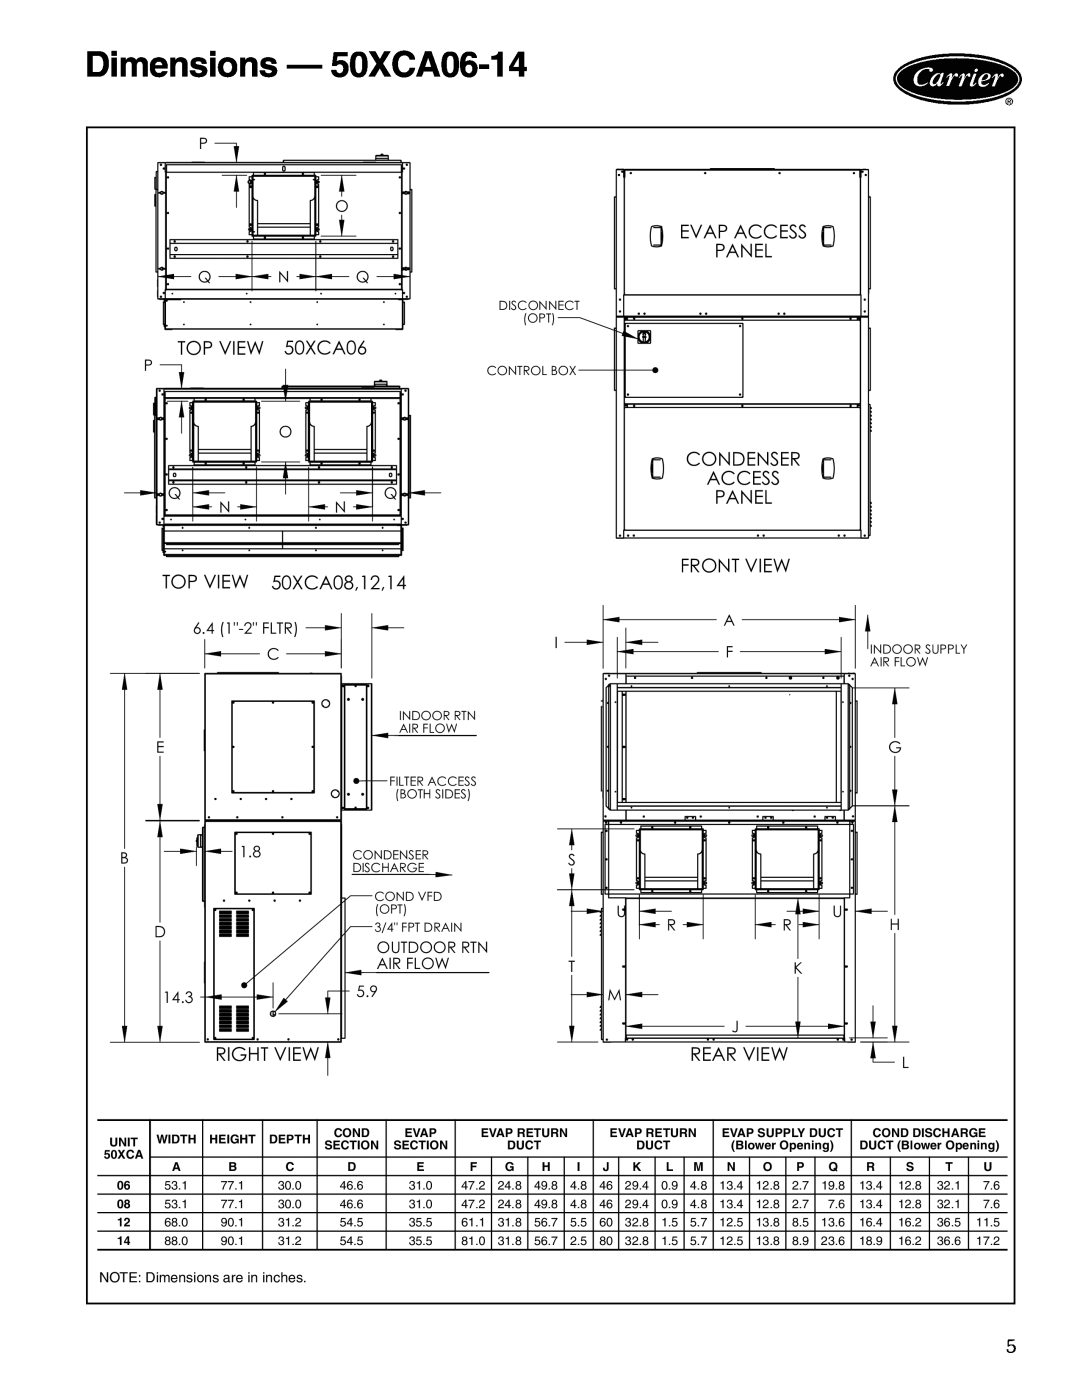 Carrier 50XCA06-24 manual Dimensions — 50XCA06-14 